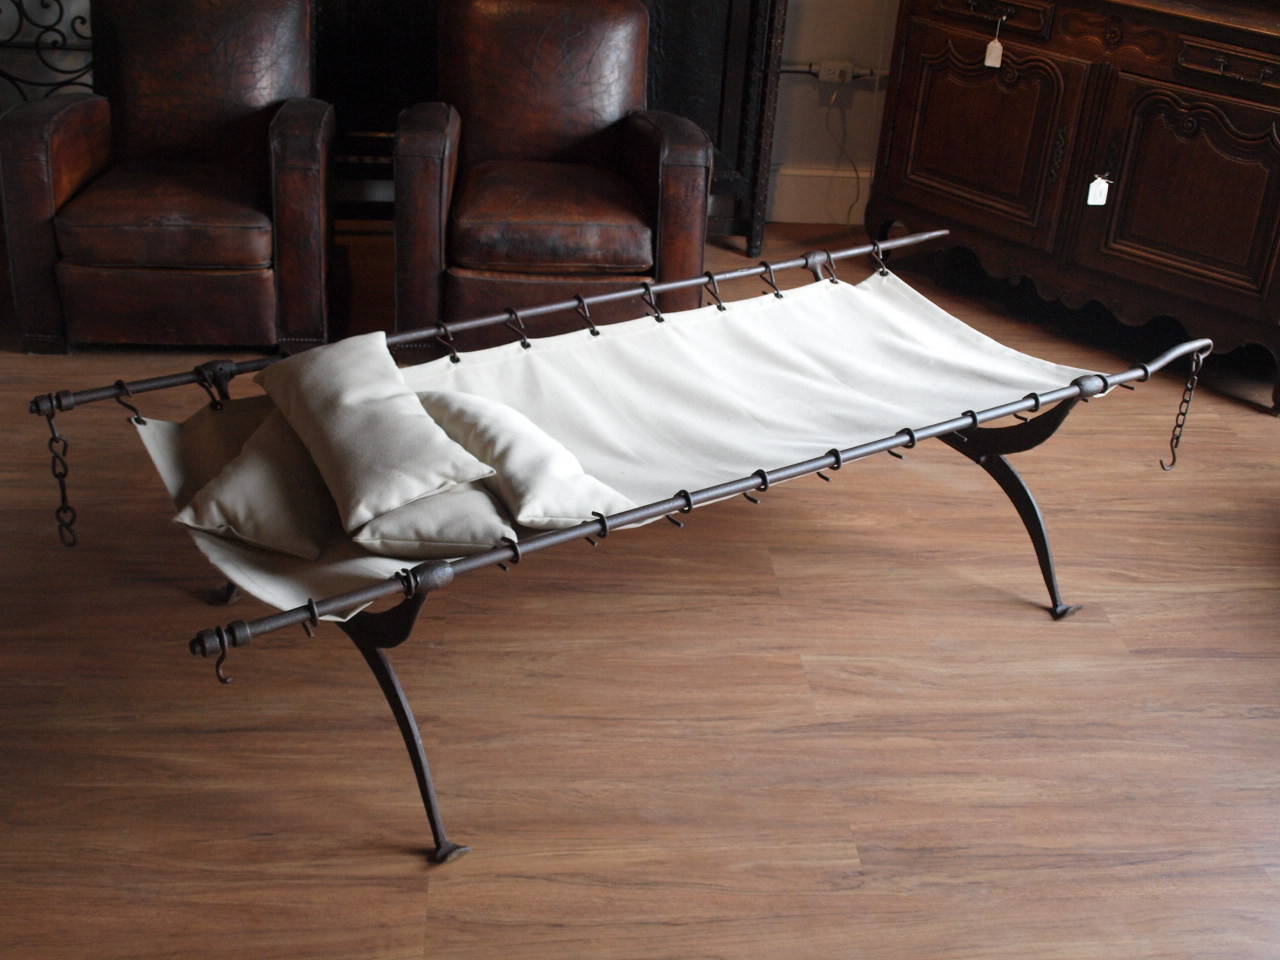 A rare mid 19th century collapsible French Campaign Bed constructed from hand forged iron - retaining its original surface.  This Campaign Bed is a wonderful accent piece - whether used as a chaise or converted into a terrific coffee table.  The